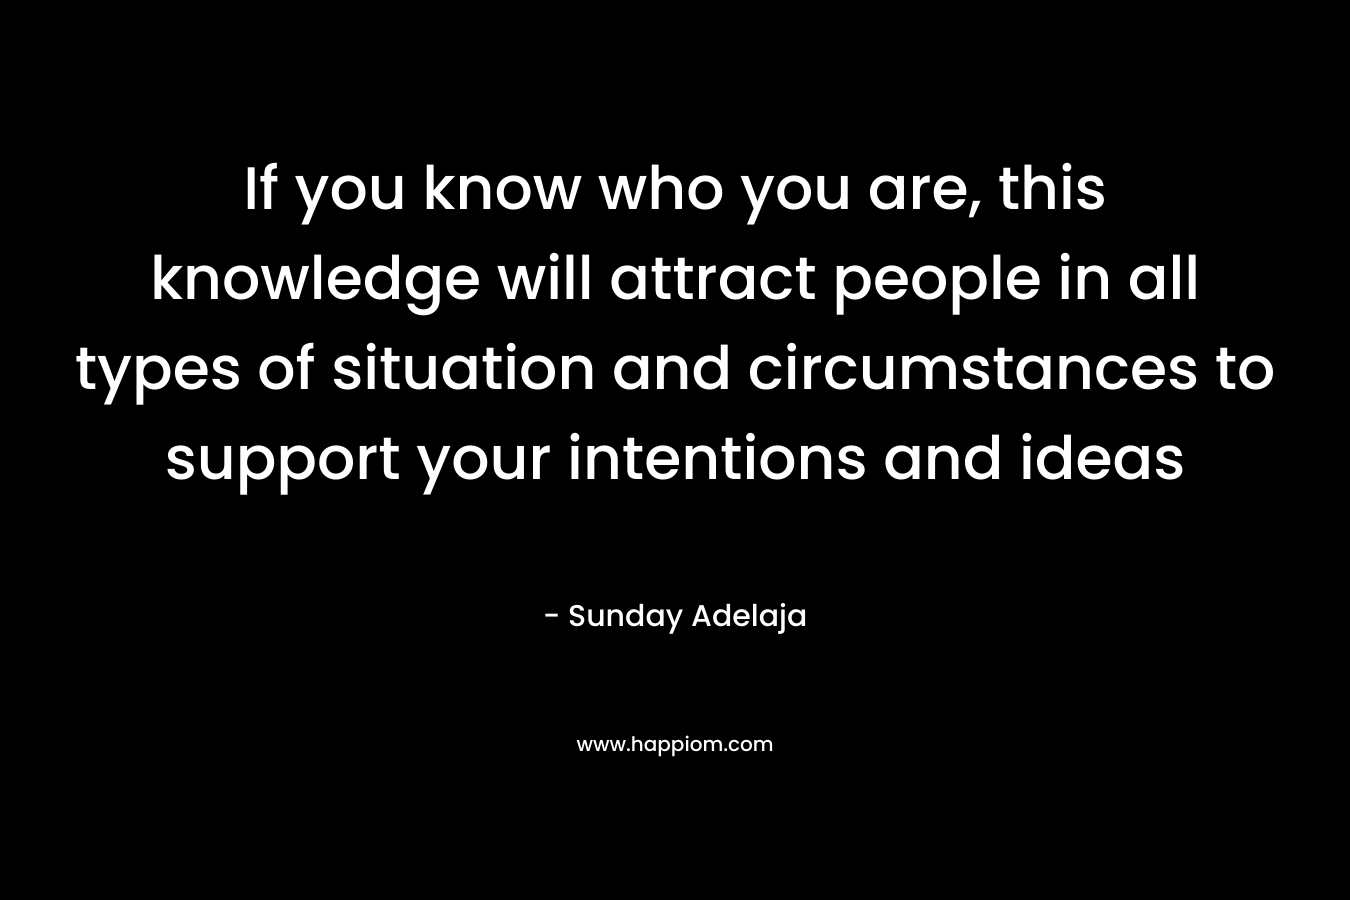 If you know who you are, this knowledge will attract people in all types of situation and circumstances to support your intentions and ideas – Sunday Adelaja